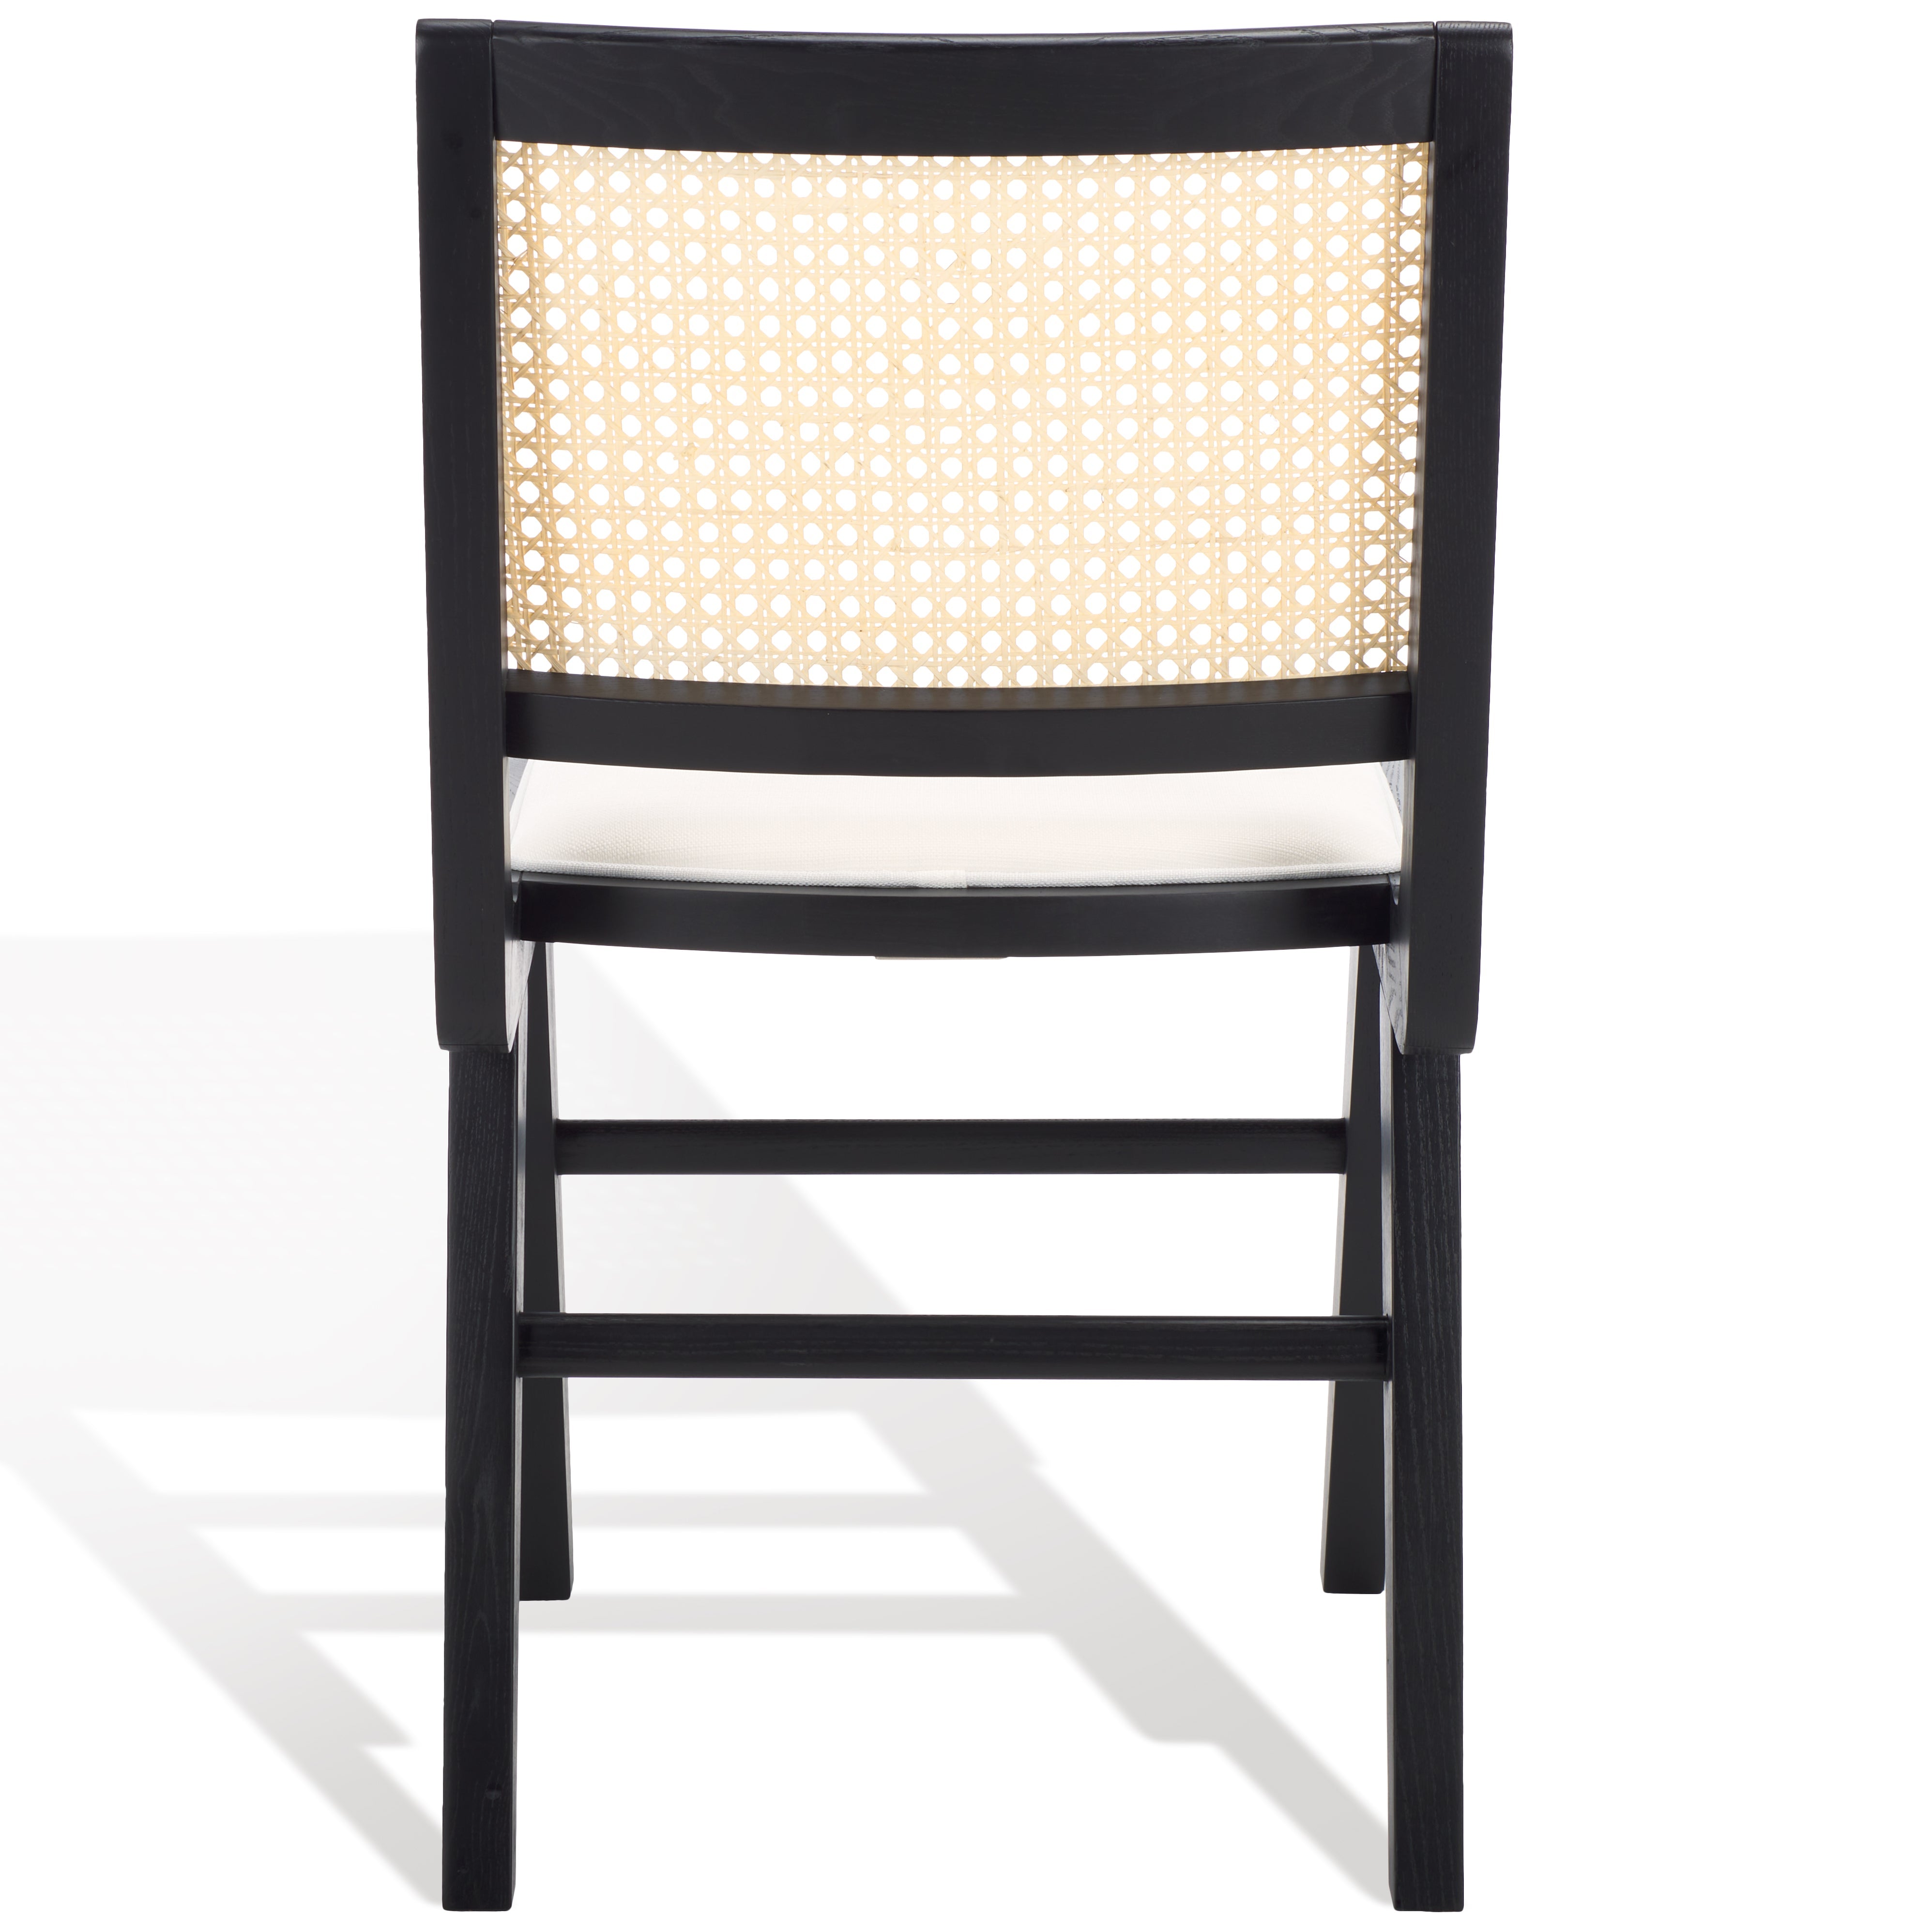 safavieh couture hattie french cane cushion seat dining chair, sfv4154 - Black / Natural